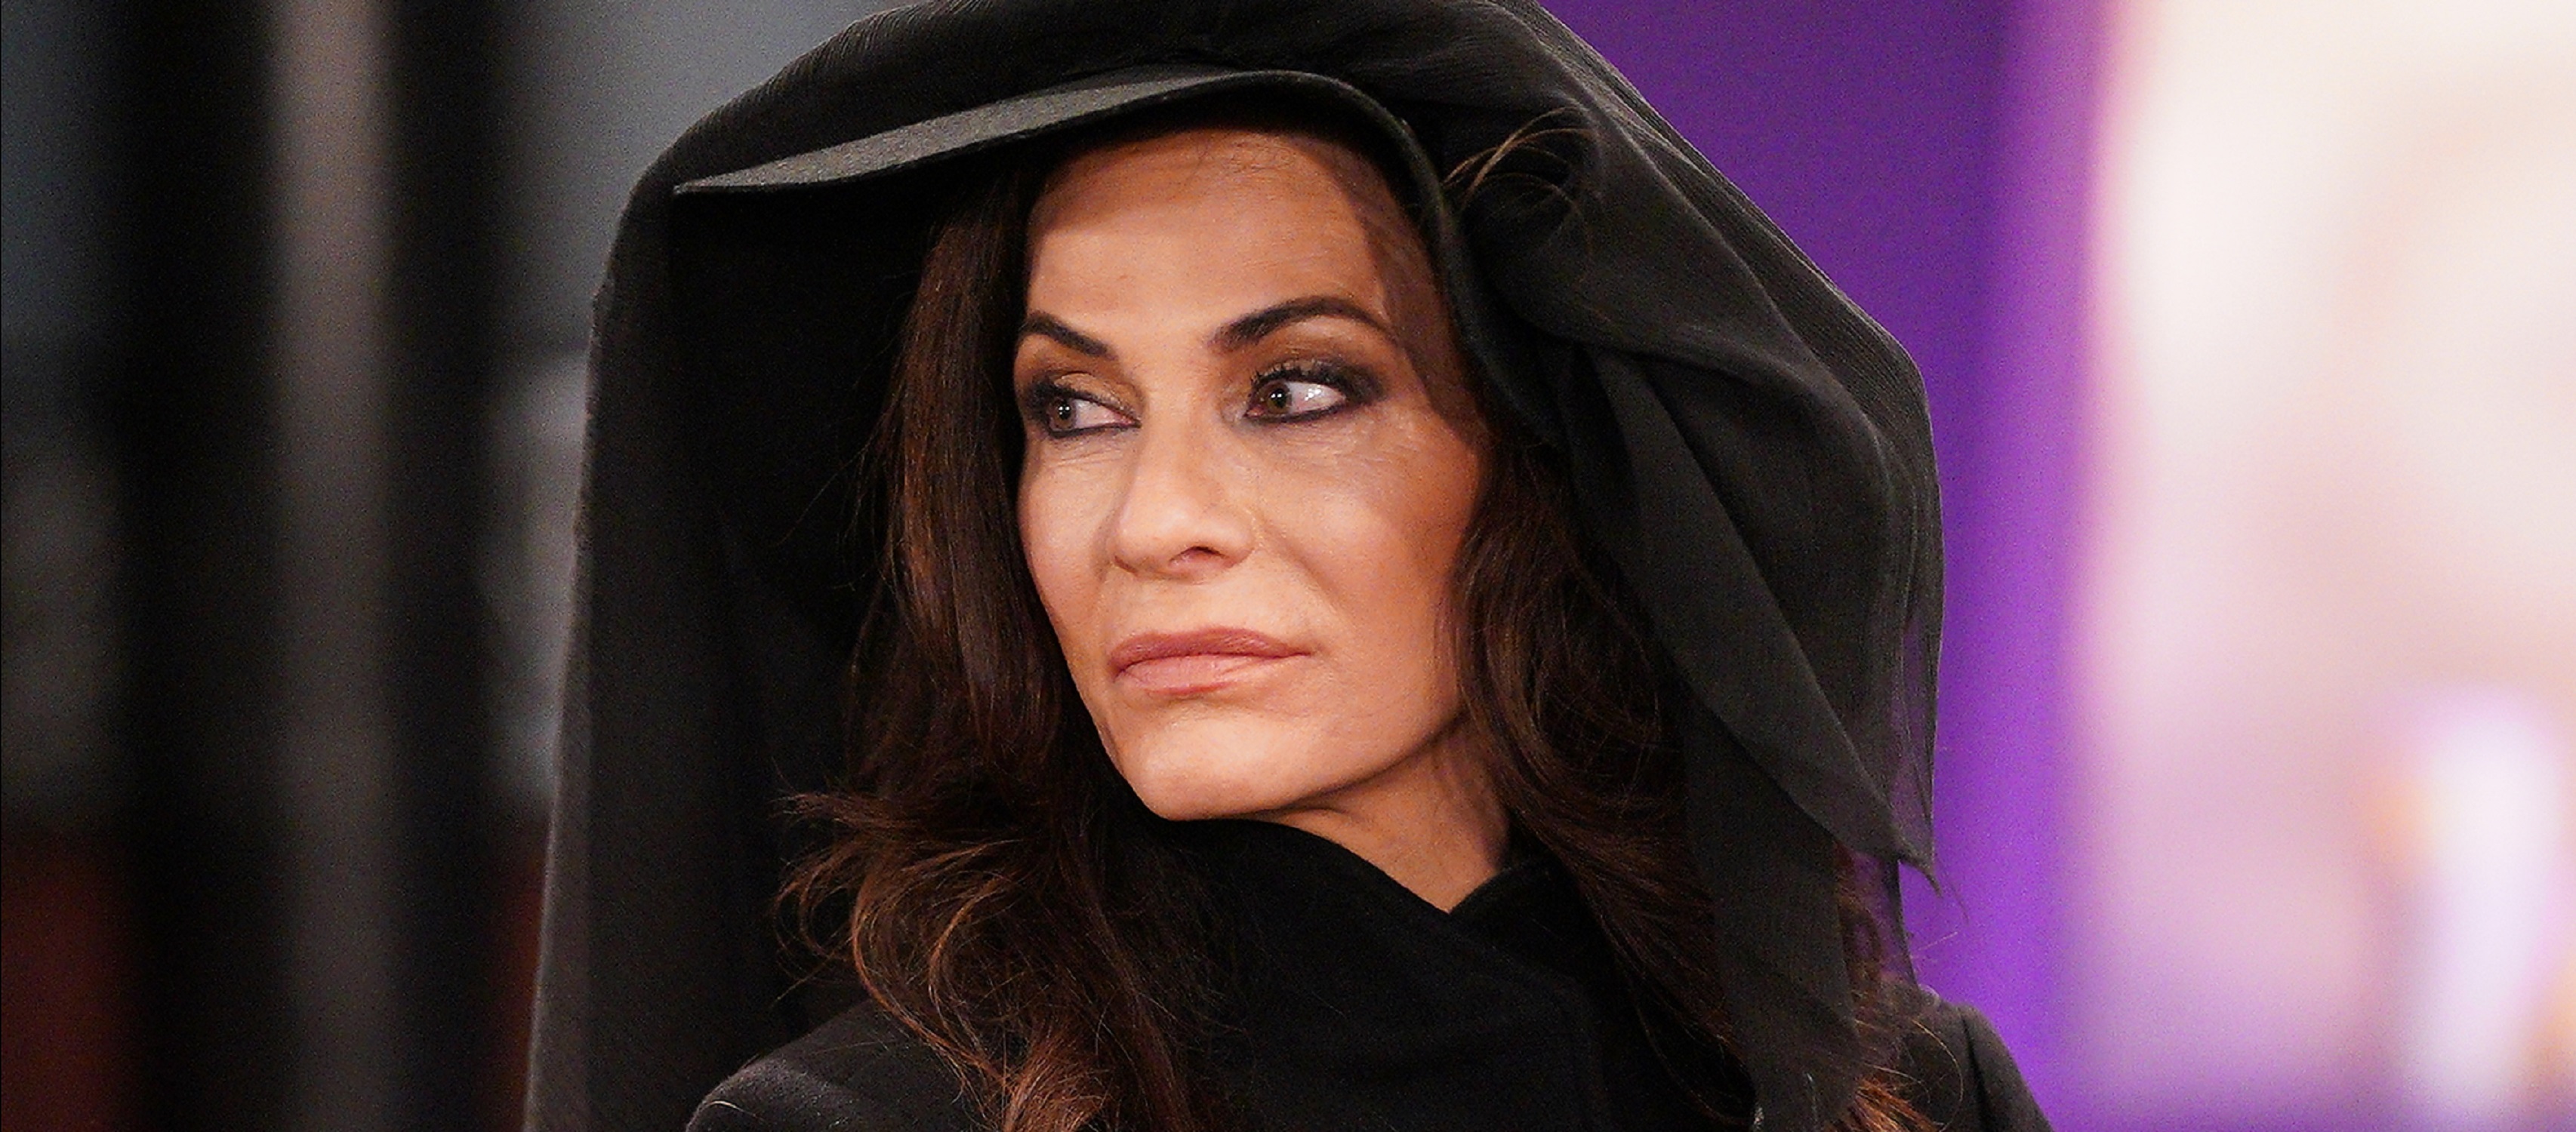 General Hospital speculation focuses on Jennifer Smith, pictured here in a black mourning veil